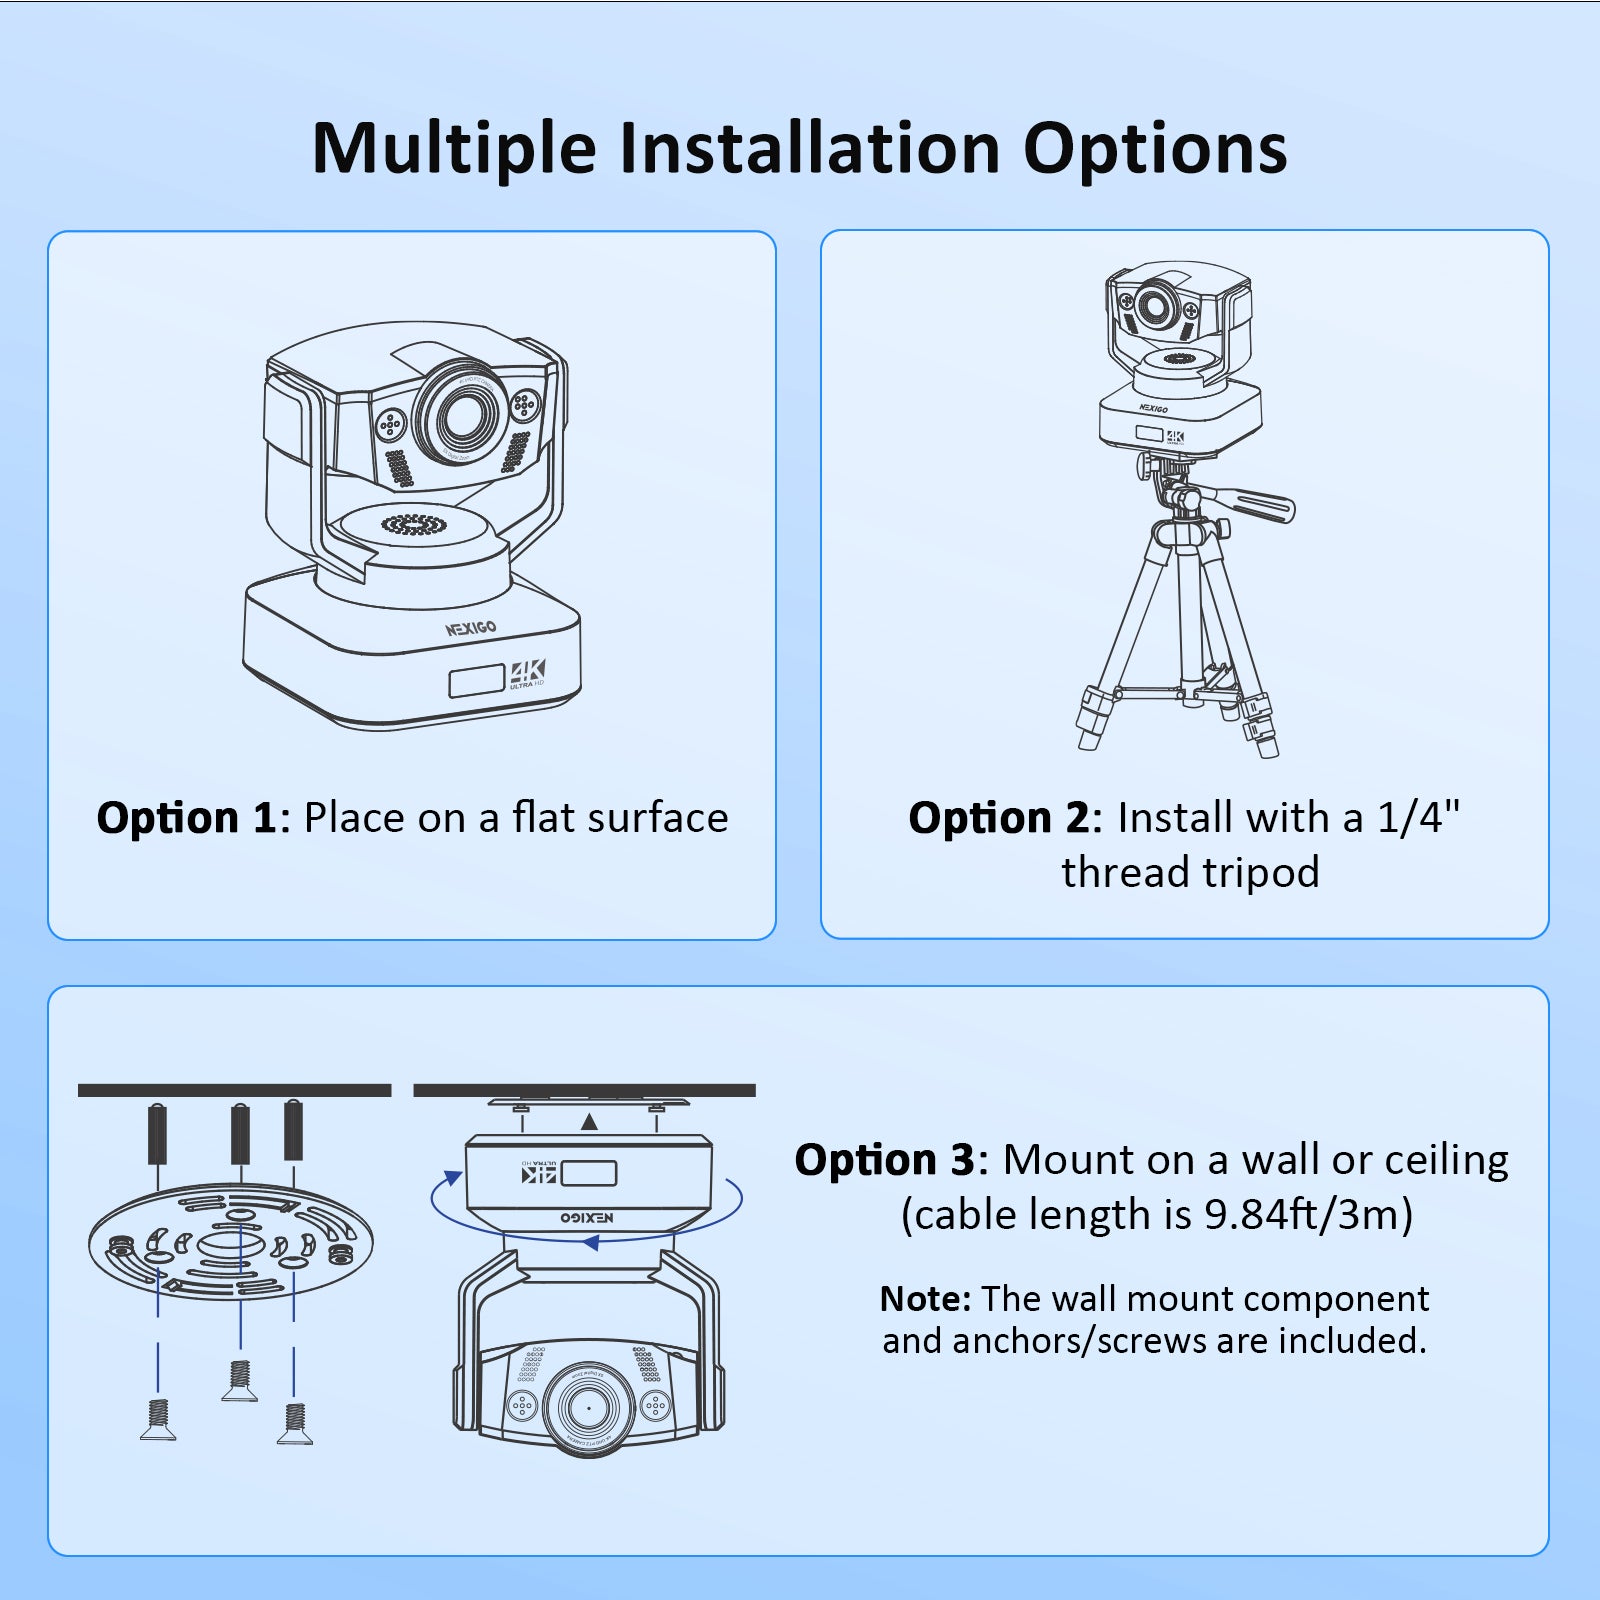 Various installation options: desktop, ceiling, and 1/4" thread tripod.